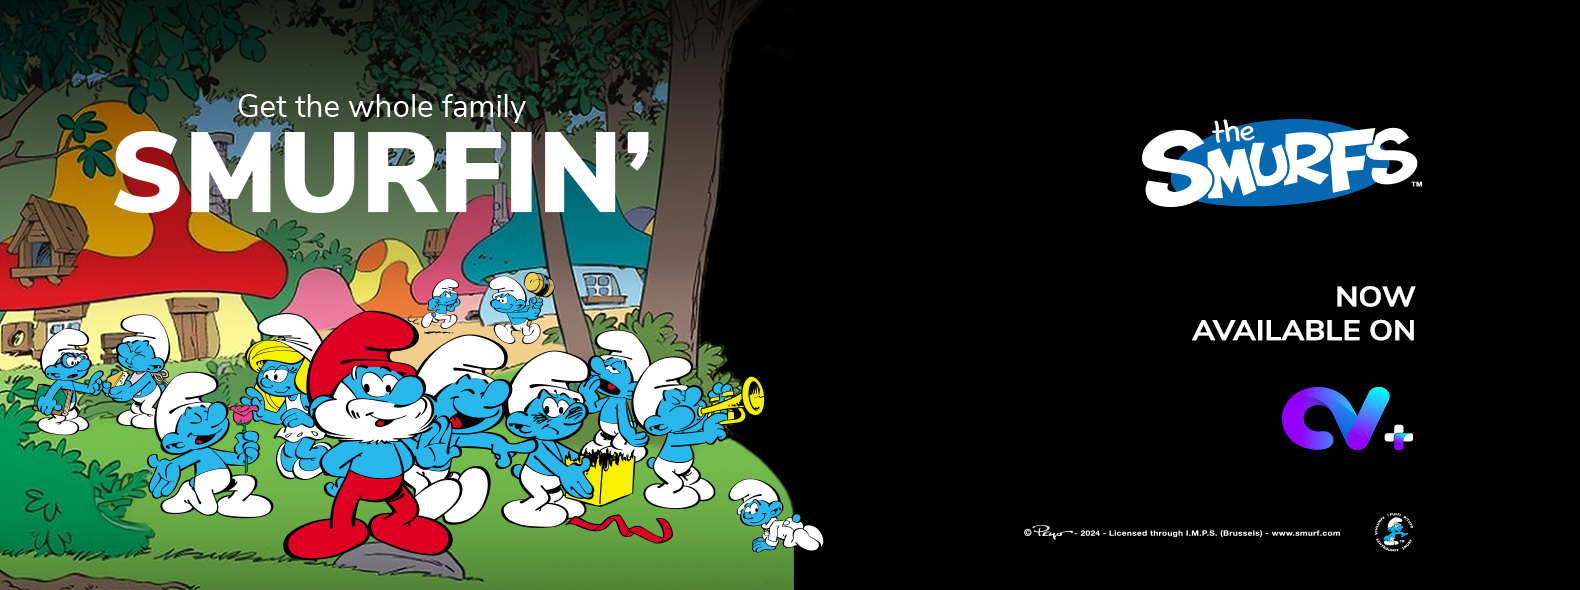 The Smurfs now available on CV+